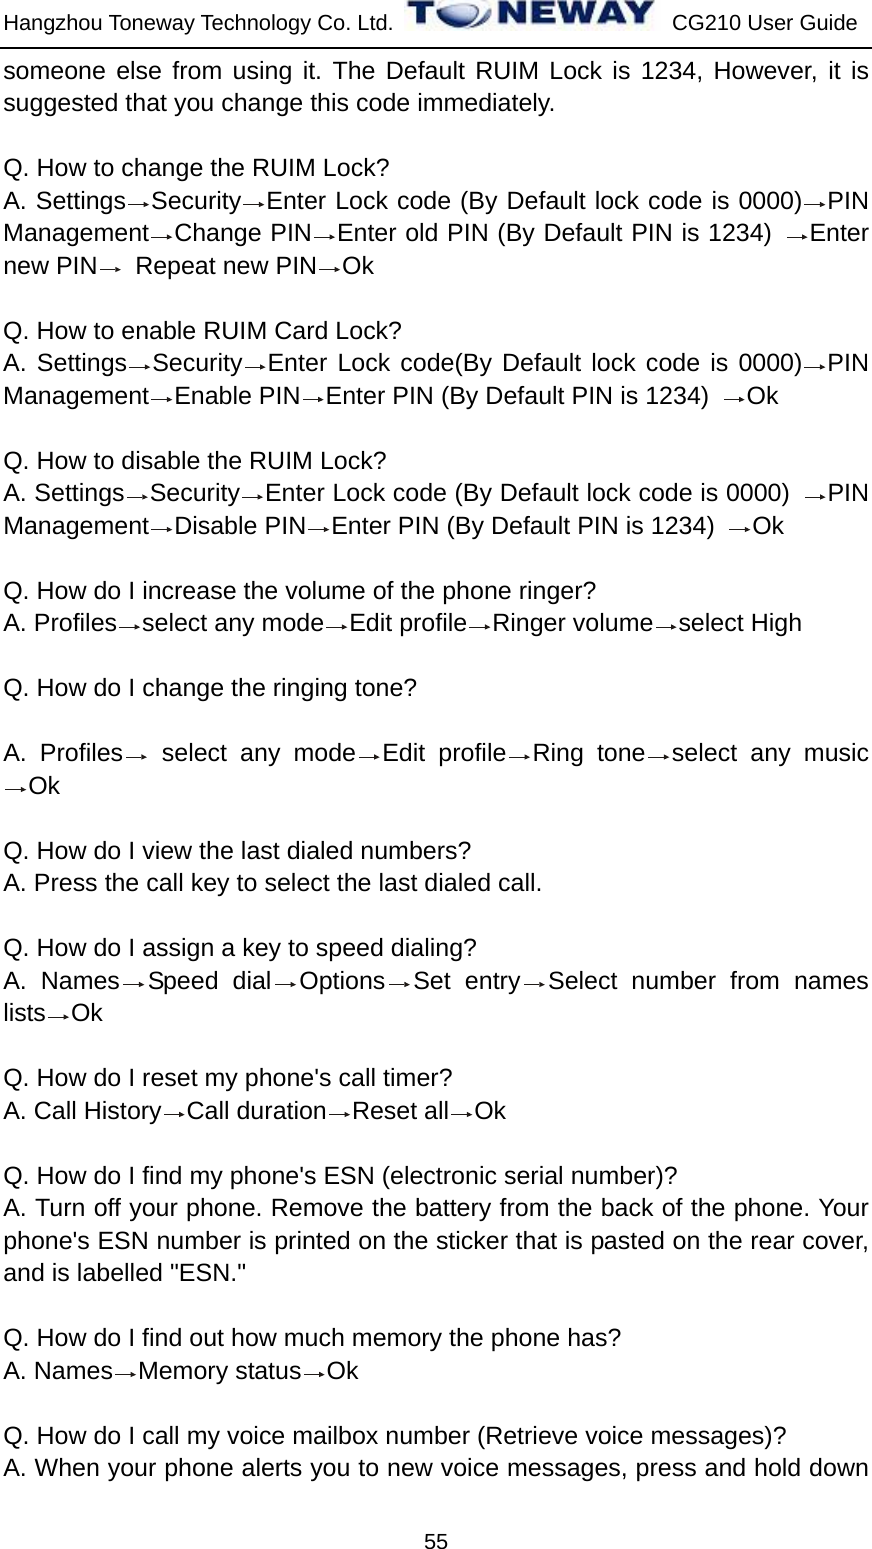 Hangzhou Toneway Technology Co. Ltd.    CG210 User Guide 55 someone else from using it. The Default RUIM Lock is 1234, However, it is suggested that you change this code immediately.  Q. How to change the RUIM Lock? A. Settings Security Enter Lock code (By Default lock code is 0000) PIN Management Change PIN Enter old PIN (By Default PIN is 1234)  Enter new PIN   Repeat new PIN Ok   Q. How to enable RUIM Card Lock? A. Settings Security Enter Lock code(By Default lock code is 0000) PIN Management Enable PIN Enter PIN (By Default PIN is 1234)  Ok  Q. How to disable the RUIM Lock? A. Settings Security Enter Lock code (By Default lock code is 0000)  PIN Management Disable PIN Enter PIN (By Default PIN is 1234)  Ok  Q. How do I increase the volume of the phone ringer? A. Profiles select any mode Edit profile Ringer volume select High    Q. How do I change the ringing tone?  A. Profiles  select any mode Edit profile Ring tone select any music Ok  Q. How do I view the last dialed numbers? A. Press the call key to select the last dialed call.  Q. How do I assign a key to speed dialing? A. Names Speed dial Options Set entry Select number from names lists Ok  Q. How do I reset my phone&apos;s call timer? A. Call History Call duration Reset all Ok  Q. How do I find my phone&apos;s ESN (electronic serial number)? A. Turn off your phone. Remove the battery from the back of the phone. Your phone&apos;s ESN number is printed on the sticker that is pasted on the rear cover, and is labelled &quot;ESN.&quot;  Q. How do I find out how much memory the phone has? A. Names Memory status Ok  Q. How do I call my voice mailbox number (Retrieve voice messages)? A. When your phone alerts you to new voice messages, press and hold down 